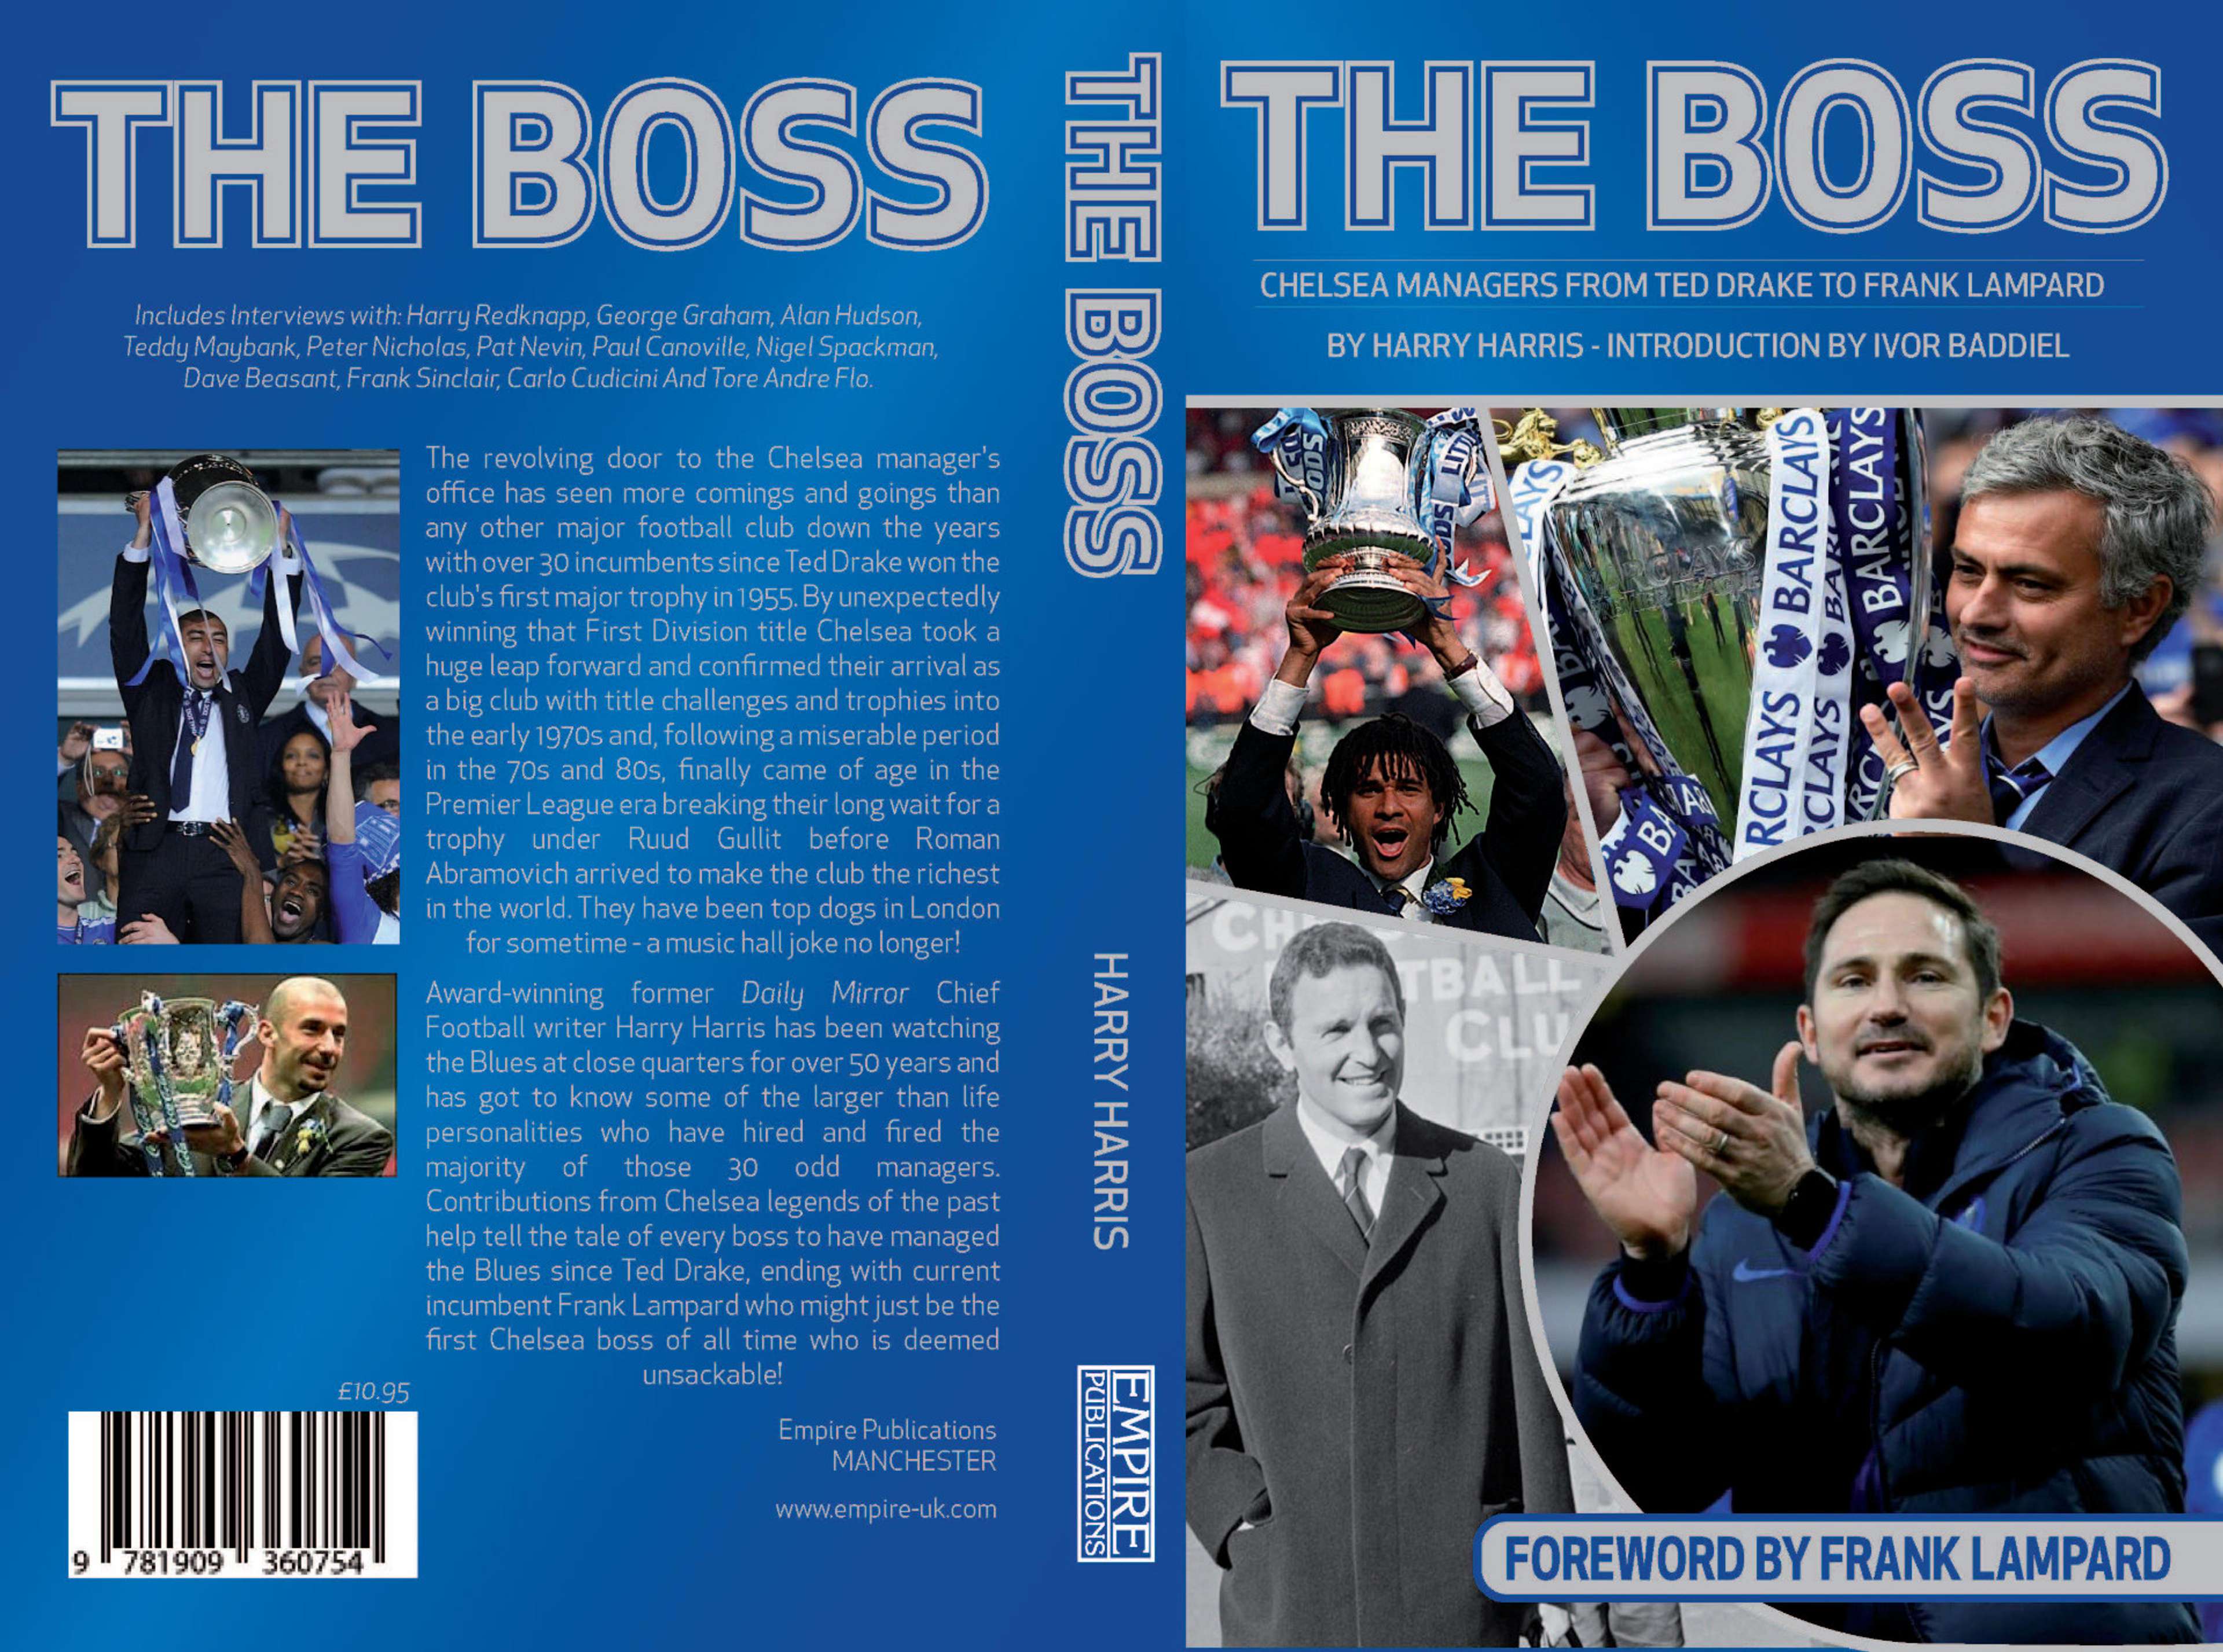 THE BOSS - CHELSEA From Ted Drake to Frank Lampard by Harry Harris Foreword by Frank Lampard, Introduction Ivor Baddiel